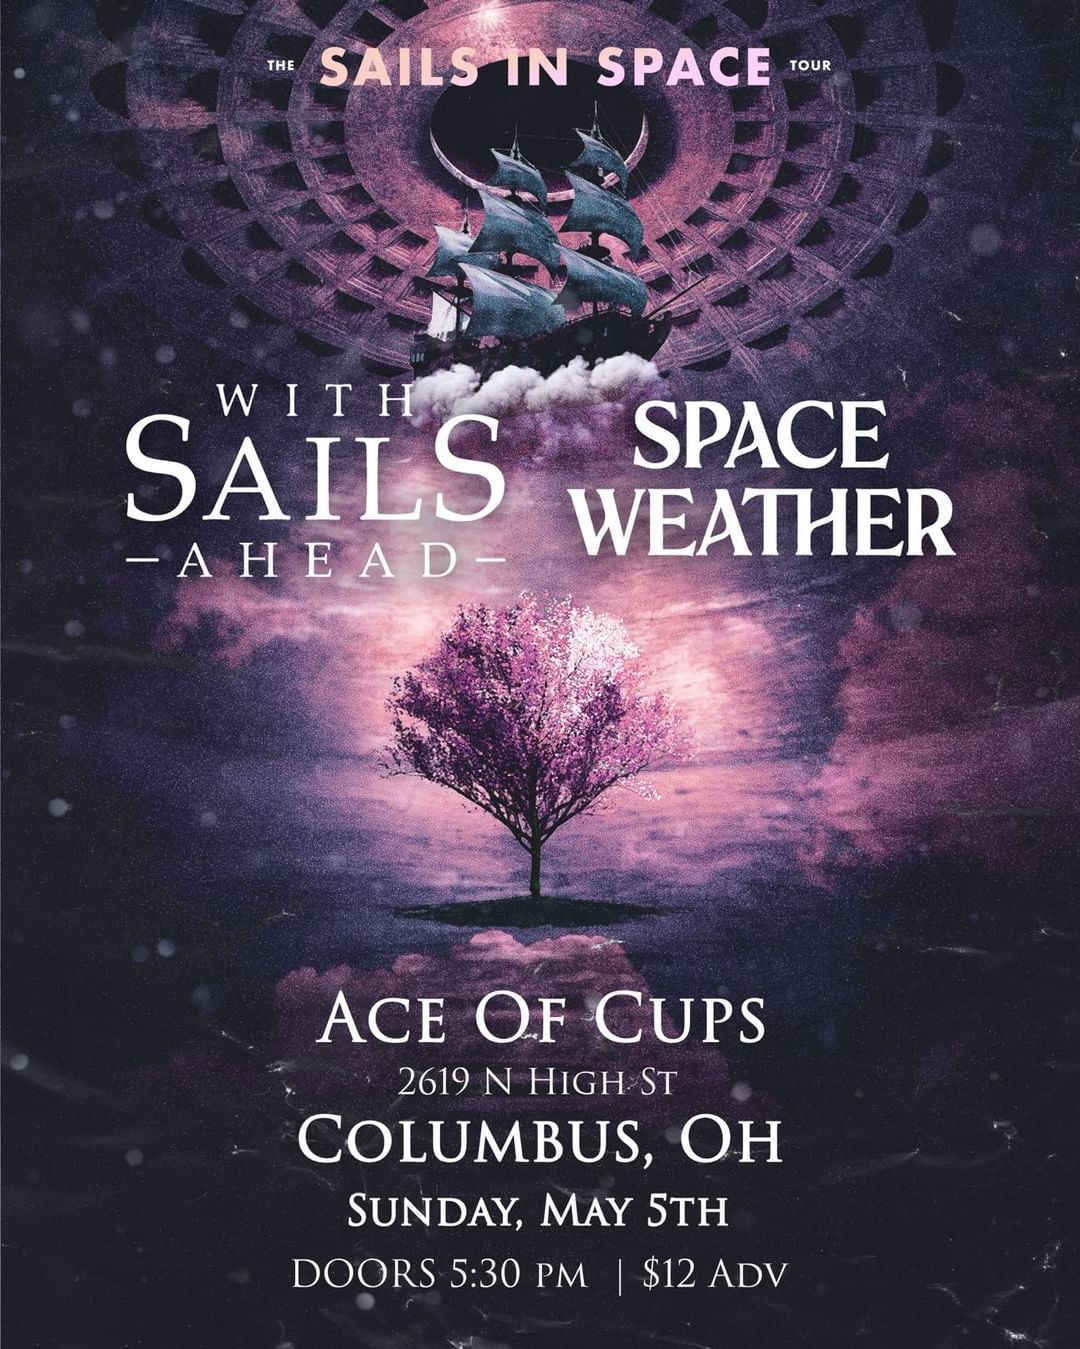 With Sails Ahead and Space Weather